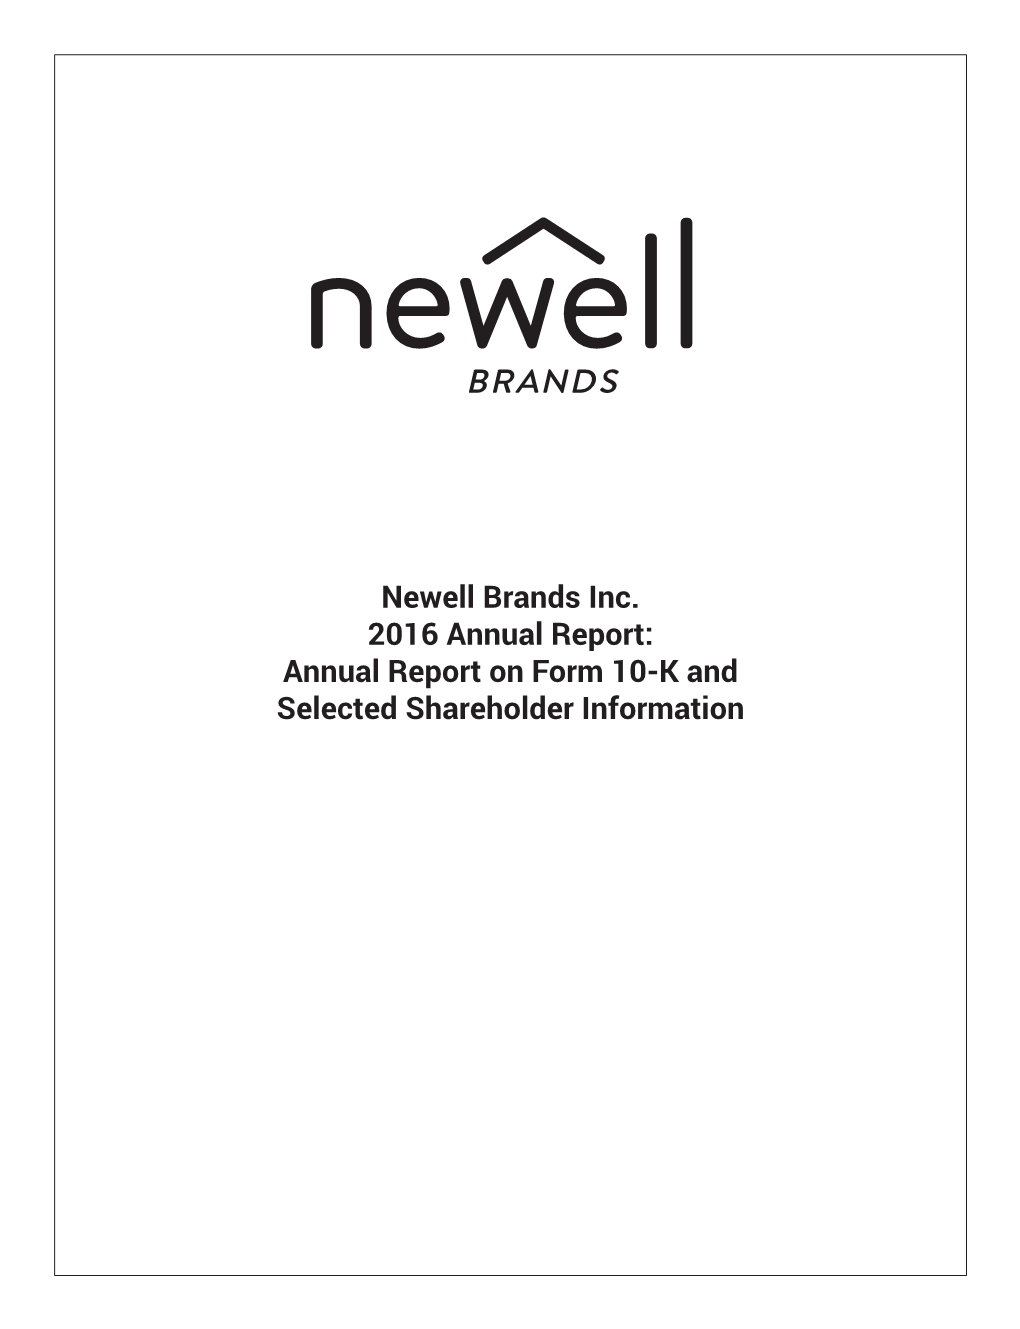 Newell Brands Inc. 2016 Annual Report: Annual Report on Form 10-K and Selected Shareholder Information